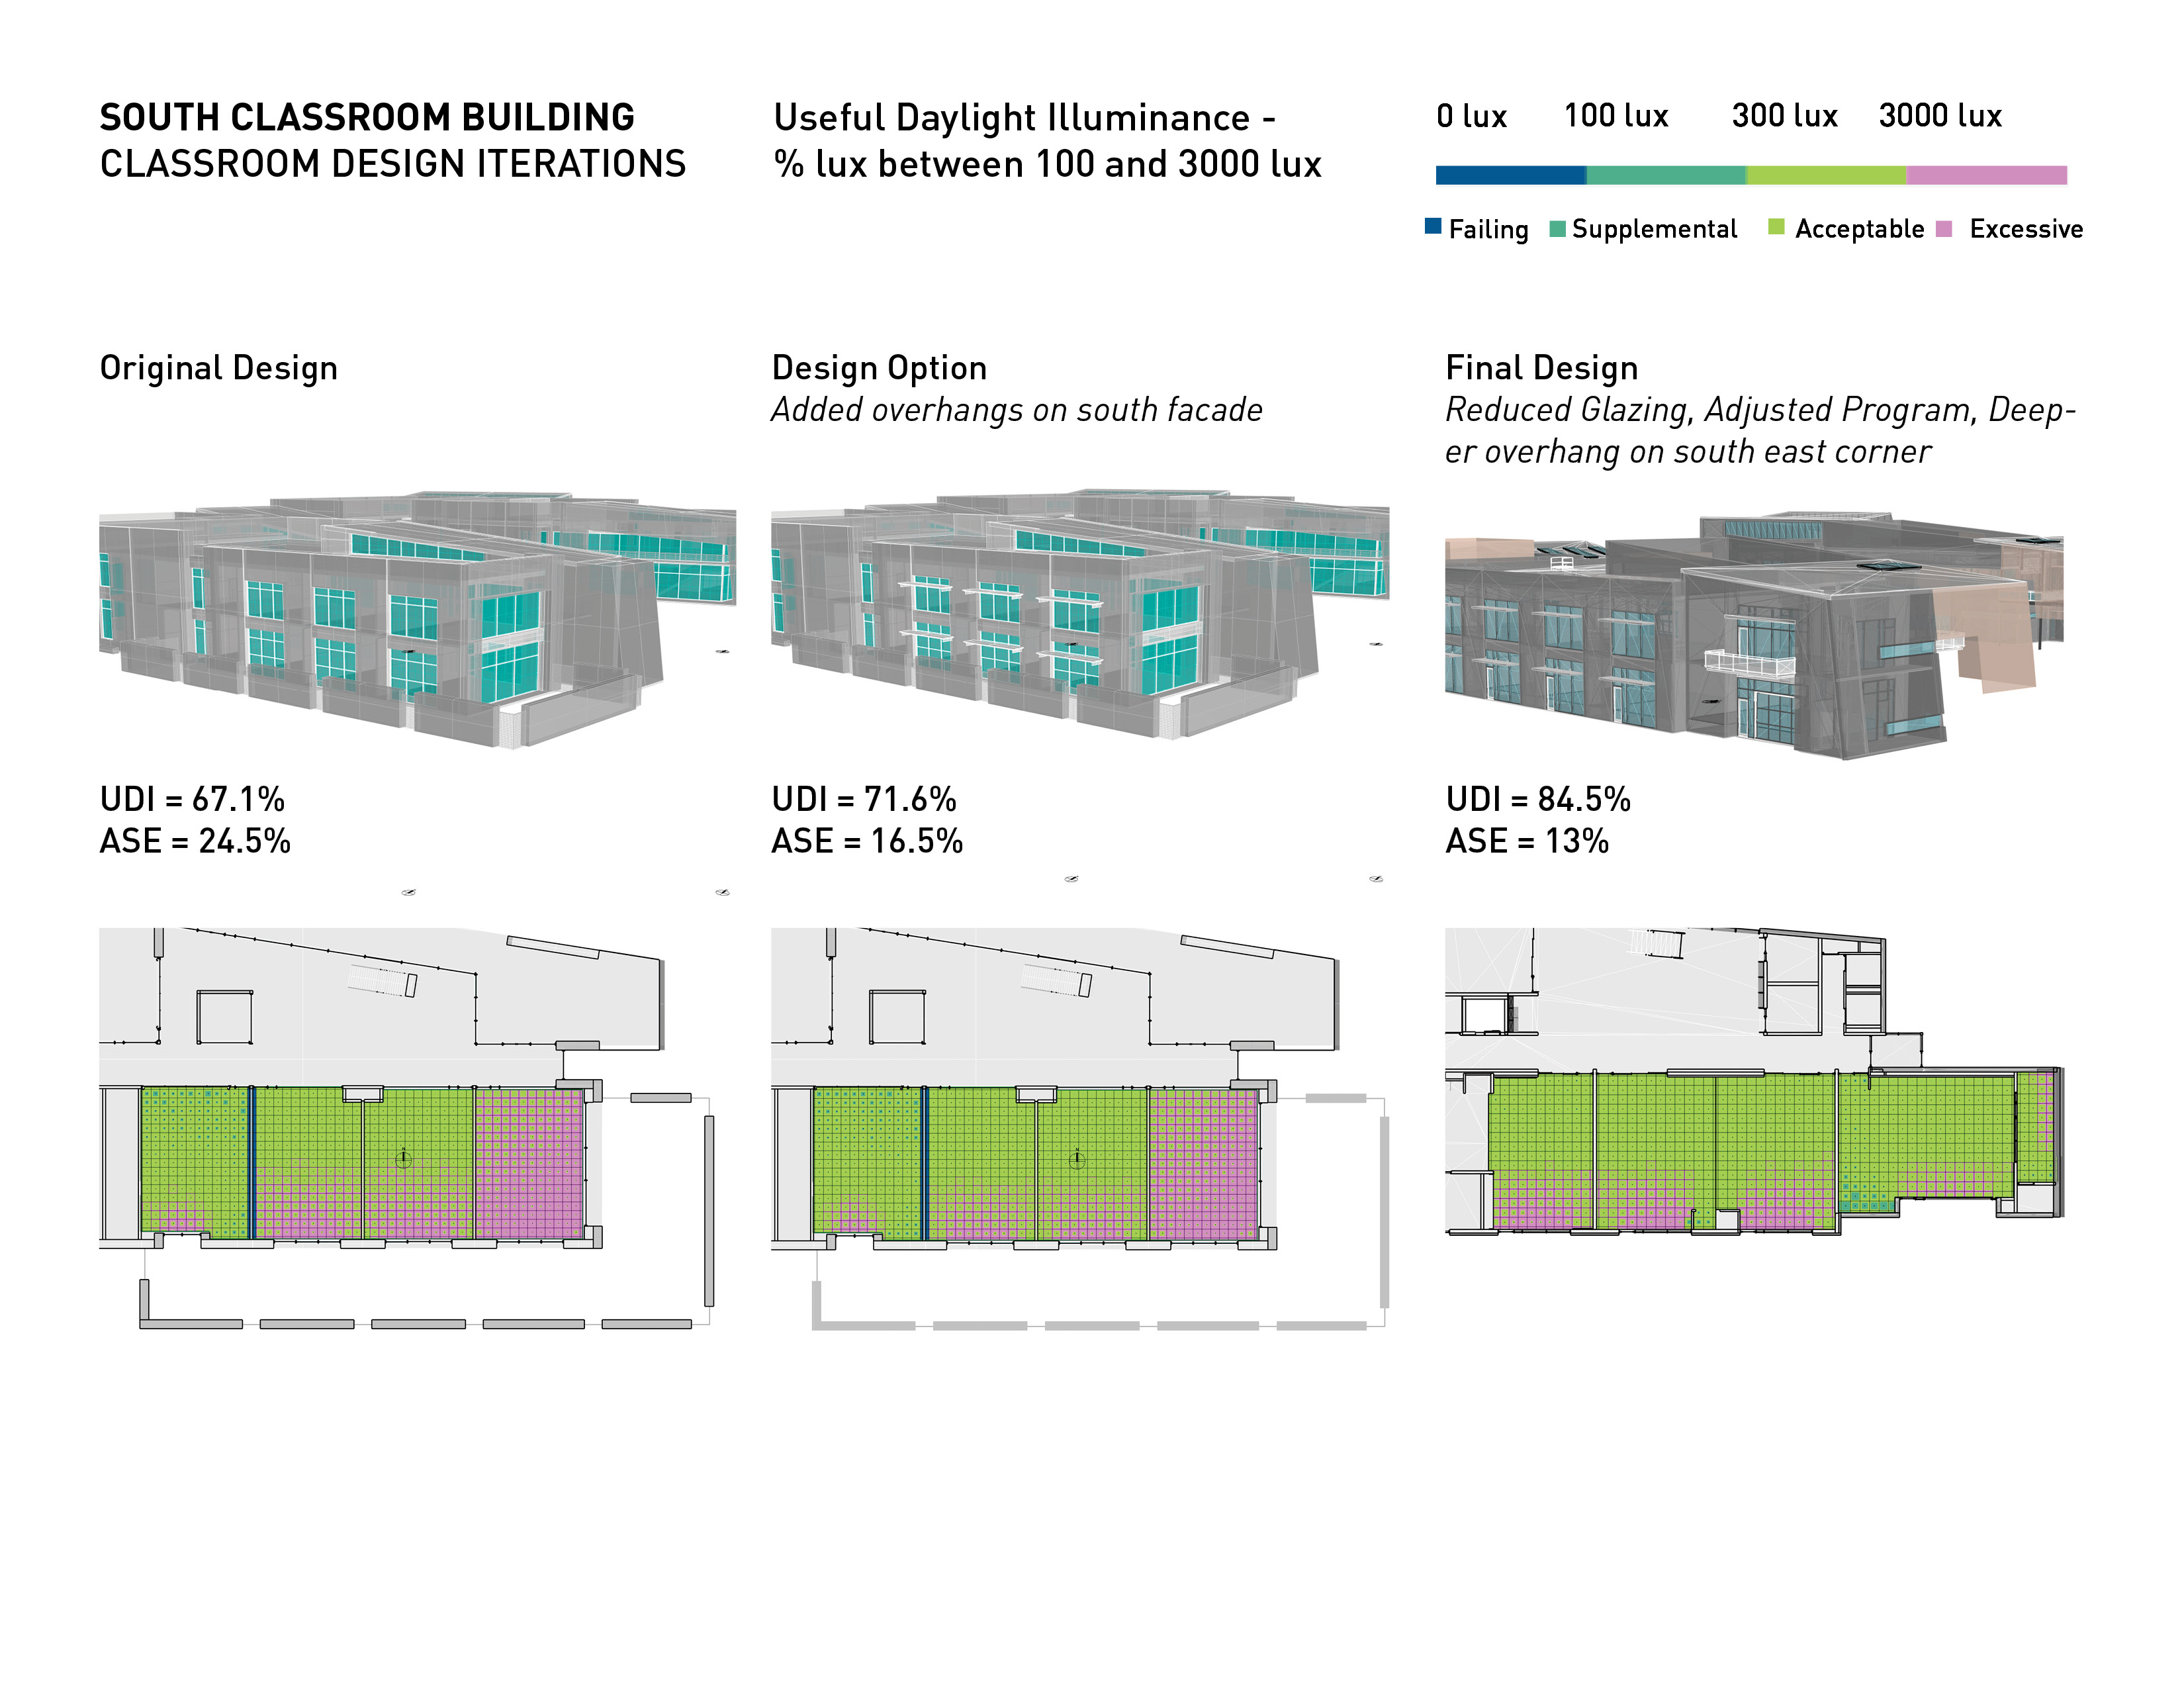 Classroom design iterations of the southern classroom building at Alamogordo Middle School.